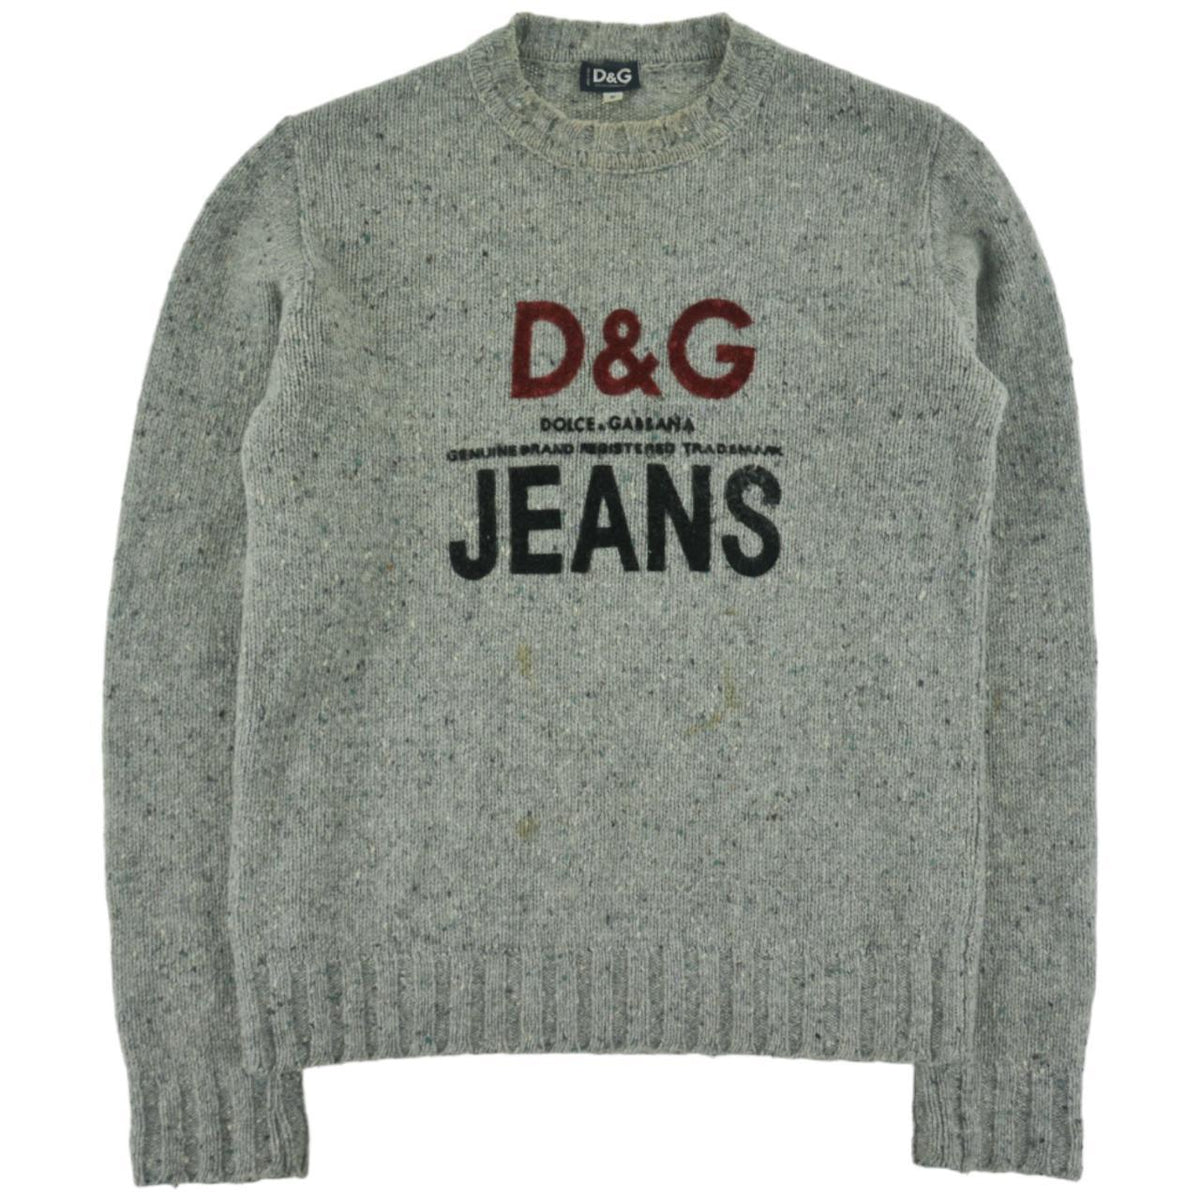 Vintage Dolce and Gabbana Knitted Jumper Woman’s Size S